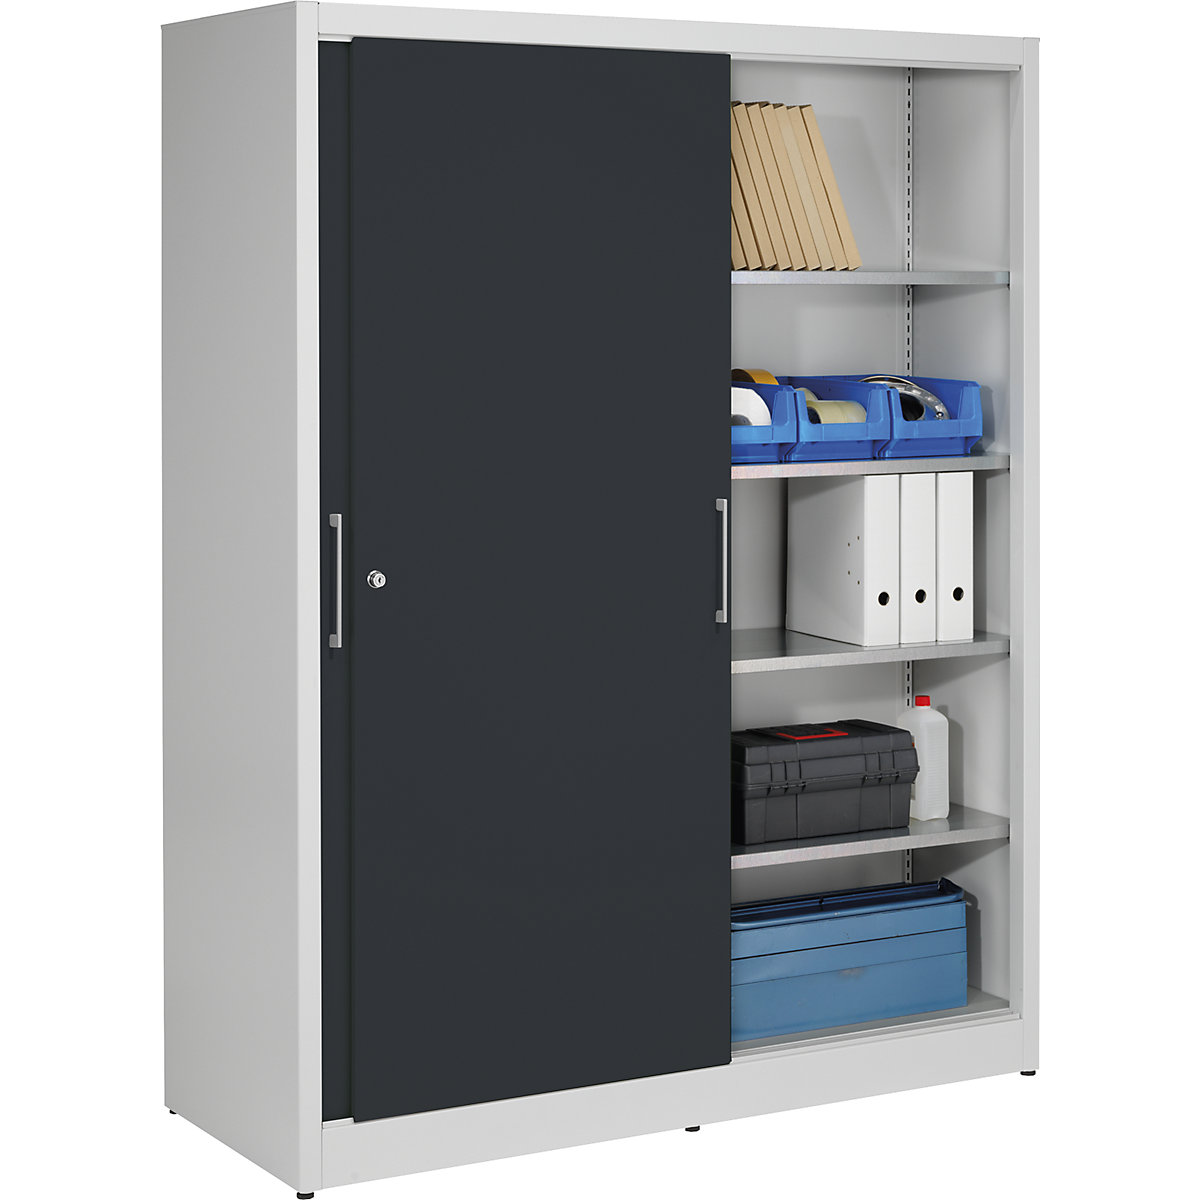 Sliding door cupboard, height 1950 mm – eurokraft pro, with centre partition and 2 x 4 shelves, width 1500 mm, depth 600 mm, doors charcoal RAL 7016-3